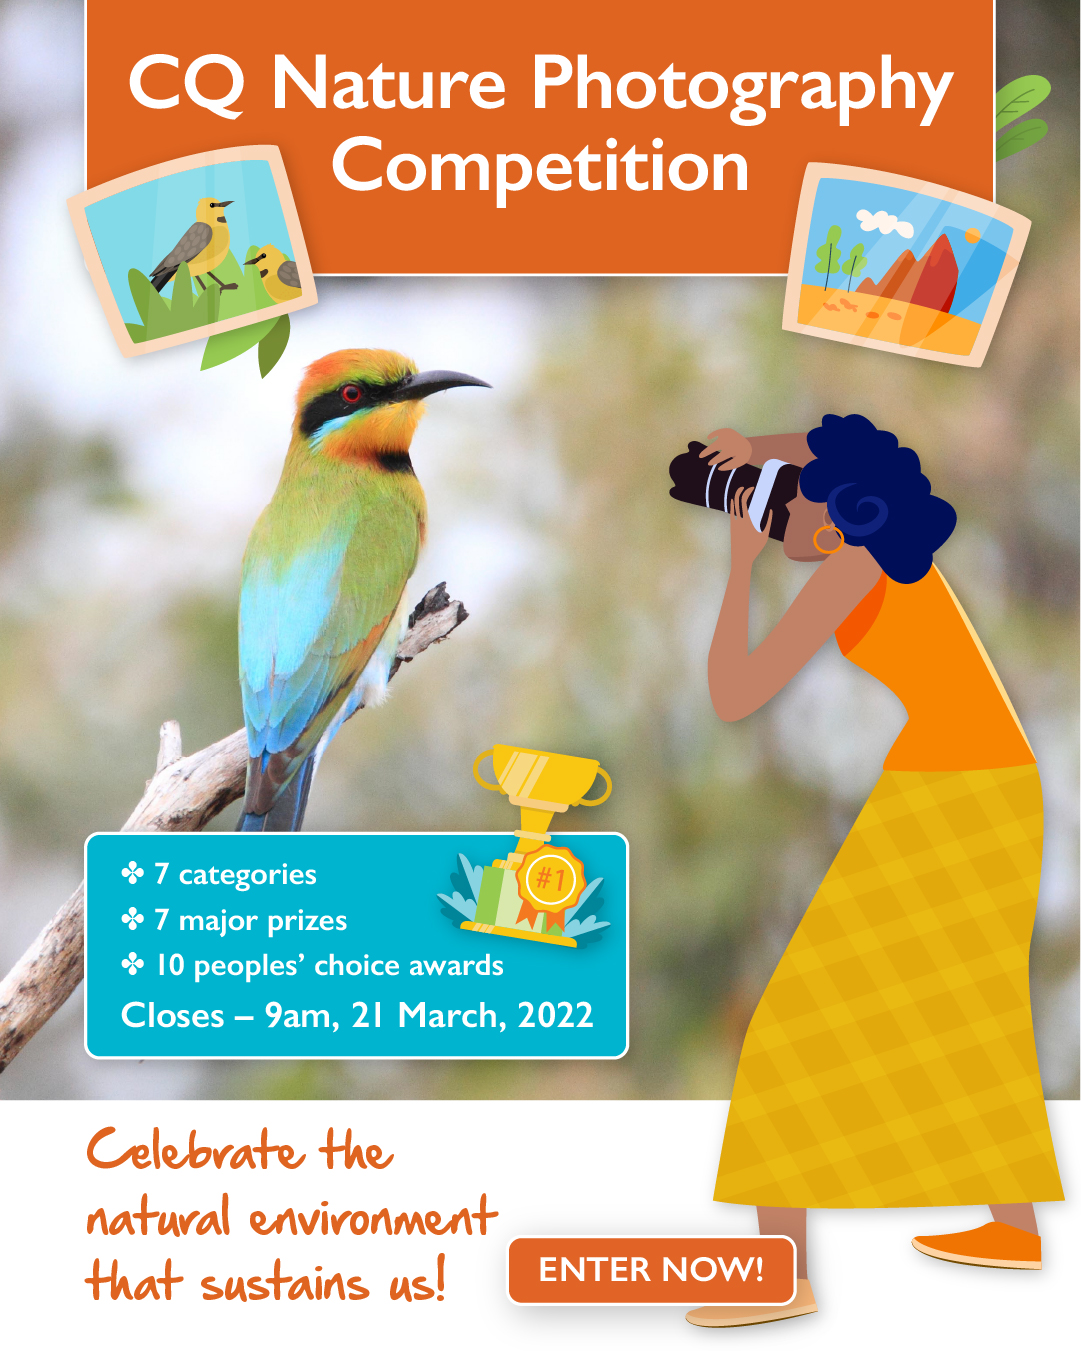 Calling all CQ photographers, nature lovers, or anyone with a smart phone! Over $10,000 in prizes is up for grabs in Fitzroy Basin Association’s (FBA) CQ Nature Photography Competition. To celebrate the environment that sustains one of the most productive regions in Australia, FBA is looking for the best images of the region’s natural assets. 

CQ has over 3 million head of cattle (making it the Beef Capital of Australia), nationally and internationally significant wetlands, marine turtle rookeries, key koala habitat and the largest river system on the east coast of Australia. It encompasses the traditional lands of at least 16 First Nations, and today is also home to passionate individuals, diverse communities, and essential industries. 

Natural assets are a part of our natural environment that provide important environmental services to individuals, businesses and communities. From productive pastures to world-class wetlands, hundreds of special species and many passionate people, CQ is worthy of the focus this competition brings to the region. From Monday 28 February, photographers are invited to capture one or more of the region’s major natural assets and/or the people or communities caring for them and share why they think it’s special. 

Seven major Fitzroy Region Experience prizes (valued collectively at over $10,000) along with 10 Peoples’ Choice awards are up for grabs. All seven major prizes include two nights’ accommodation and an experience voucher. 

The competition is open to both amateur and professional photographers of any age, who live, work, play or study in the Fitzroy region.   

Everyone has a role to play in creating a more sustainable future and FBA’s Regional Engagement Coordinator, Jo Kurpershoek, outlines that participating in this competition is a fun and meaningful way to get involved. 

“Whether you enter a photo or just vote for your favourite, anyone can get involved in celebrating and promoting what is special about our CQ landscapes, waterways, plants, animals and people,” said Jo. 

The competition has been created to commemorate the fourth decade and revision of the Central Queensland Sustainability Strategy 2030 (CQSS2030). The strategy has been created with and for the central Queensland community and provides a roadmap to guide our region towards a sustainable future. 

The latest updates include a website refresh to present the updated strategy, which now features a story sharing platform for the CQ community, and activities to help anyone take sustainable action. Drawing on the best available scientific knowledge, as well as global, Australian and Queensland targets, the CQSS2030 marries them with what our regional communities want for their future. The photos collected through the CQ Nature Photography Competition will add to the online platform, highlighting CQ communities’ commitment and appreciation of their local environment. 

“This is a fantastic opportunity for us to celebrate the complexity and beauty of central Queensland’s natural assets and people, and share it with others,” Jo added. 

Enter now and show us what you love about CQ – https://cqss2030.com.au/photo-gallery/  
Media contact – Johanna Ramsey – Johanna.ramsey@fba.org.au | 07 4999 2808 | 0448 314 292 